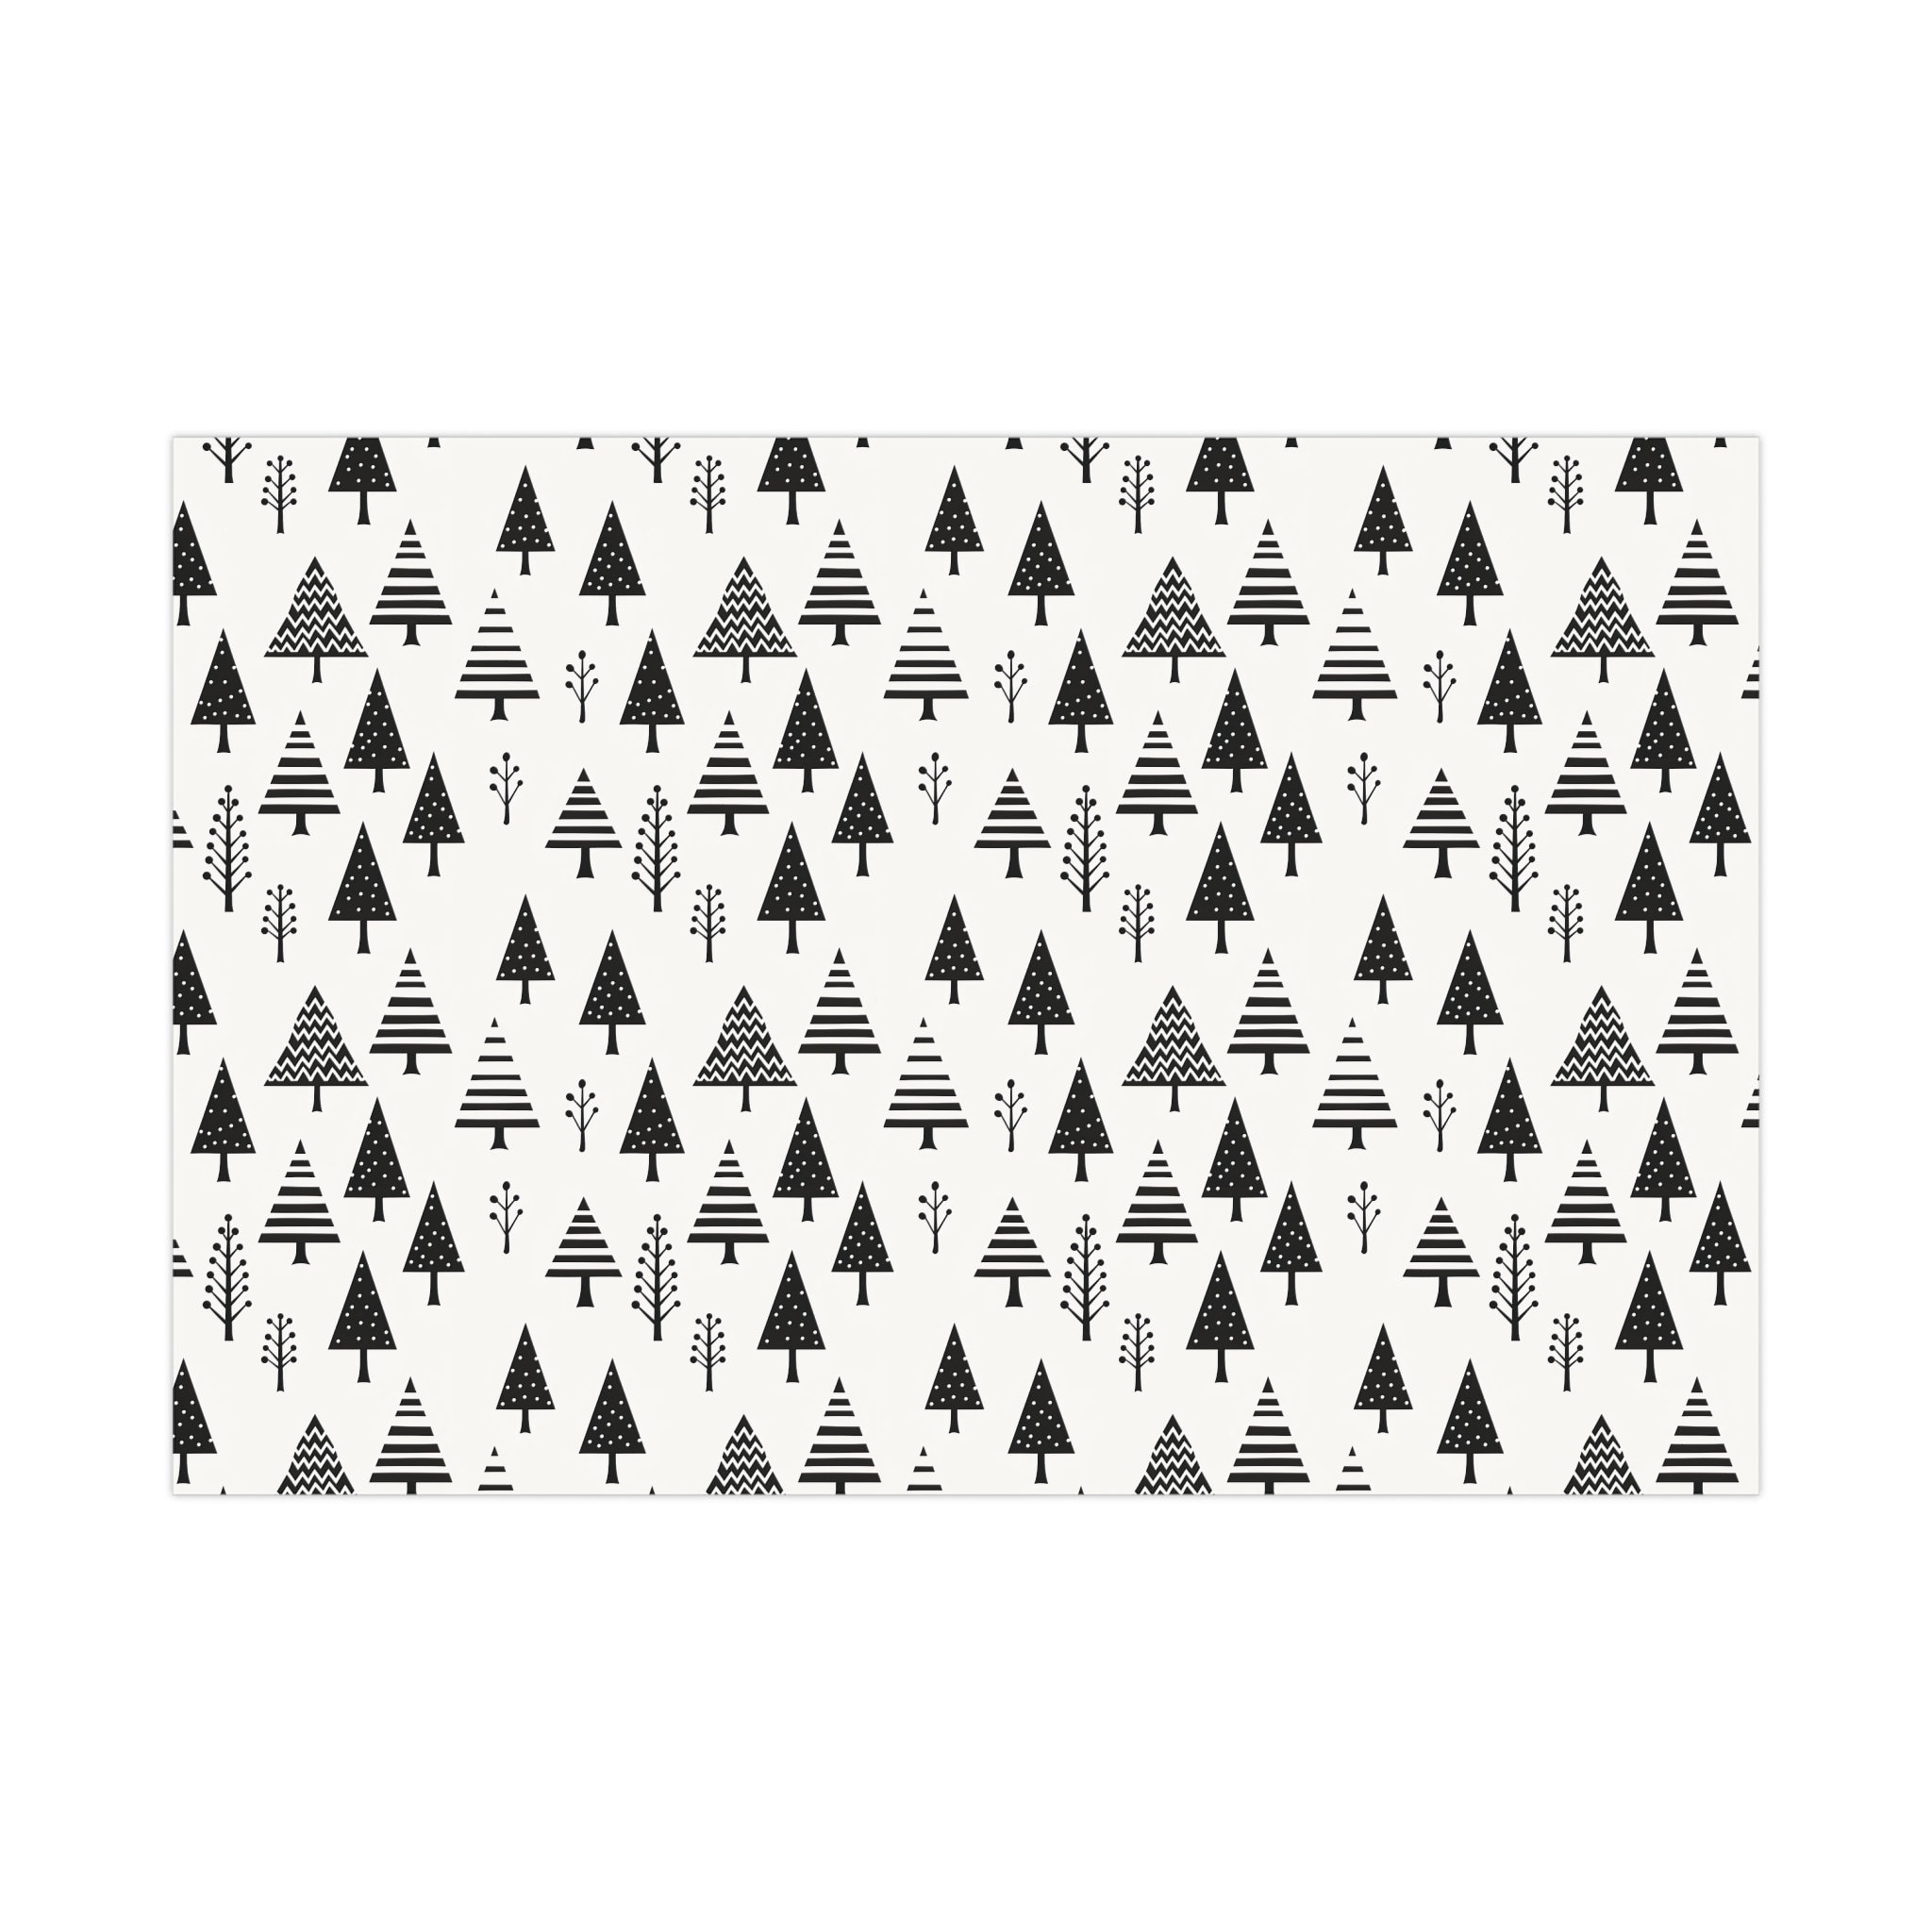 Merry Black Wrapping Paper Modern Christmas, Holiday Gift Wrap, Minimal,  Black and White 